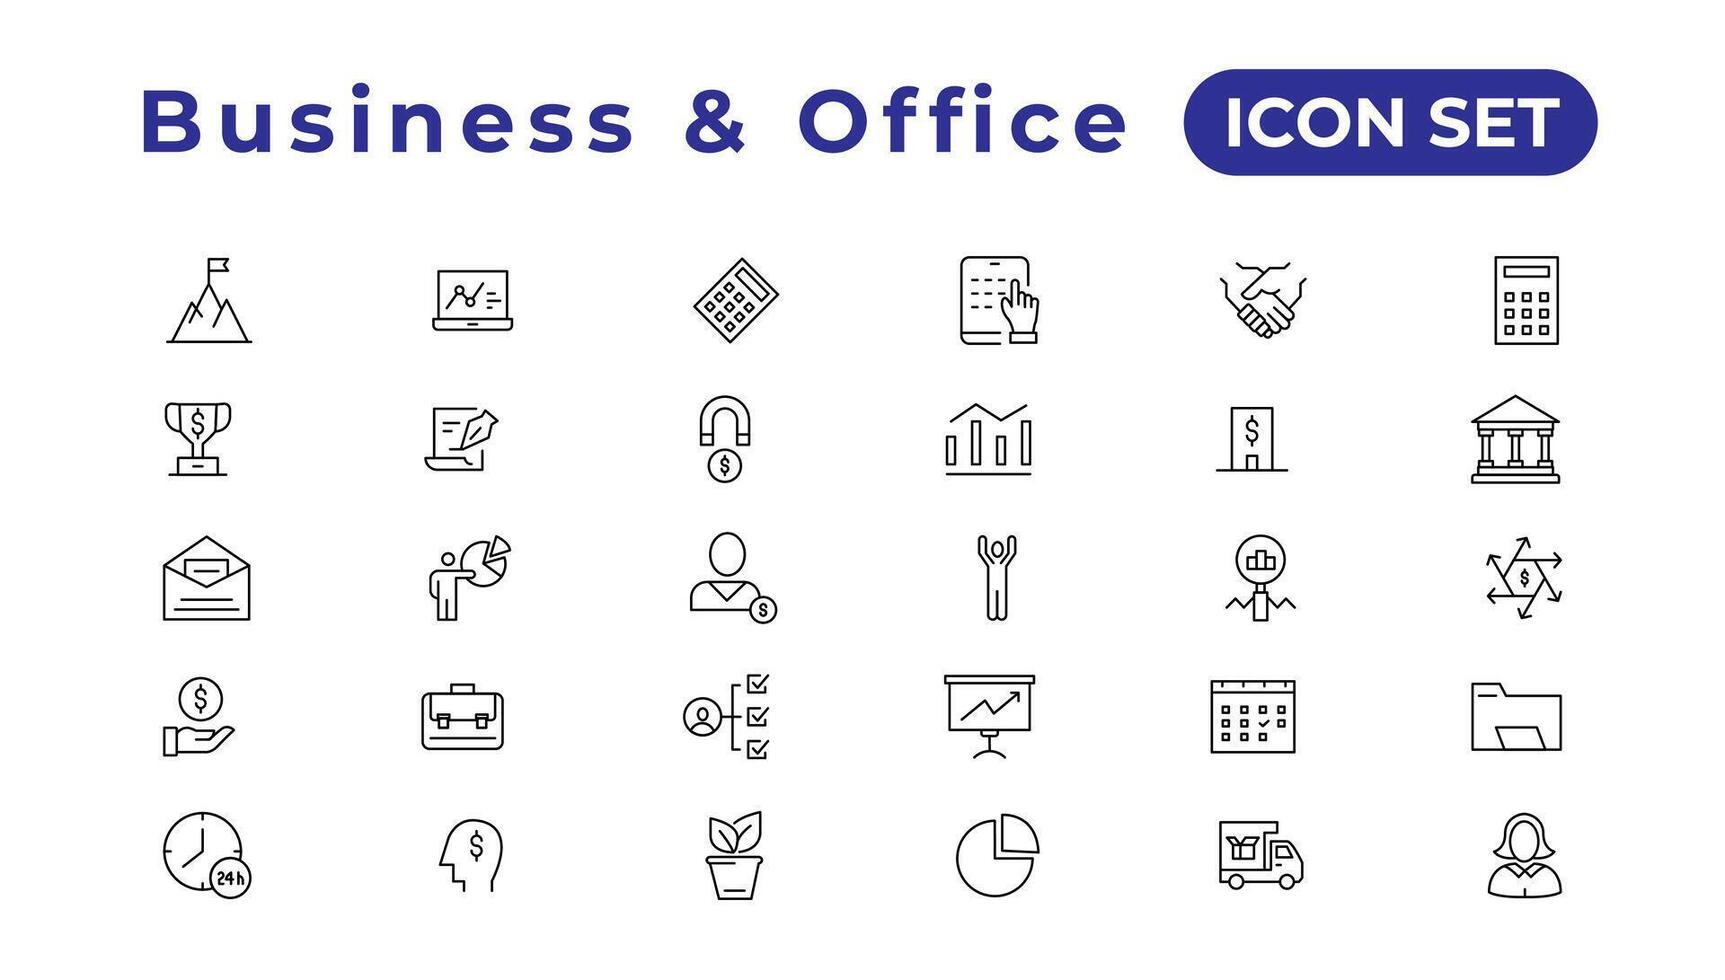 Business strategy set of web icons in line style. Business solutions icons for web and mobile app. Action List, research, solution, team, marketing, startup, advertising, business process vector